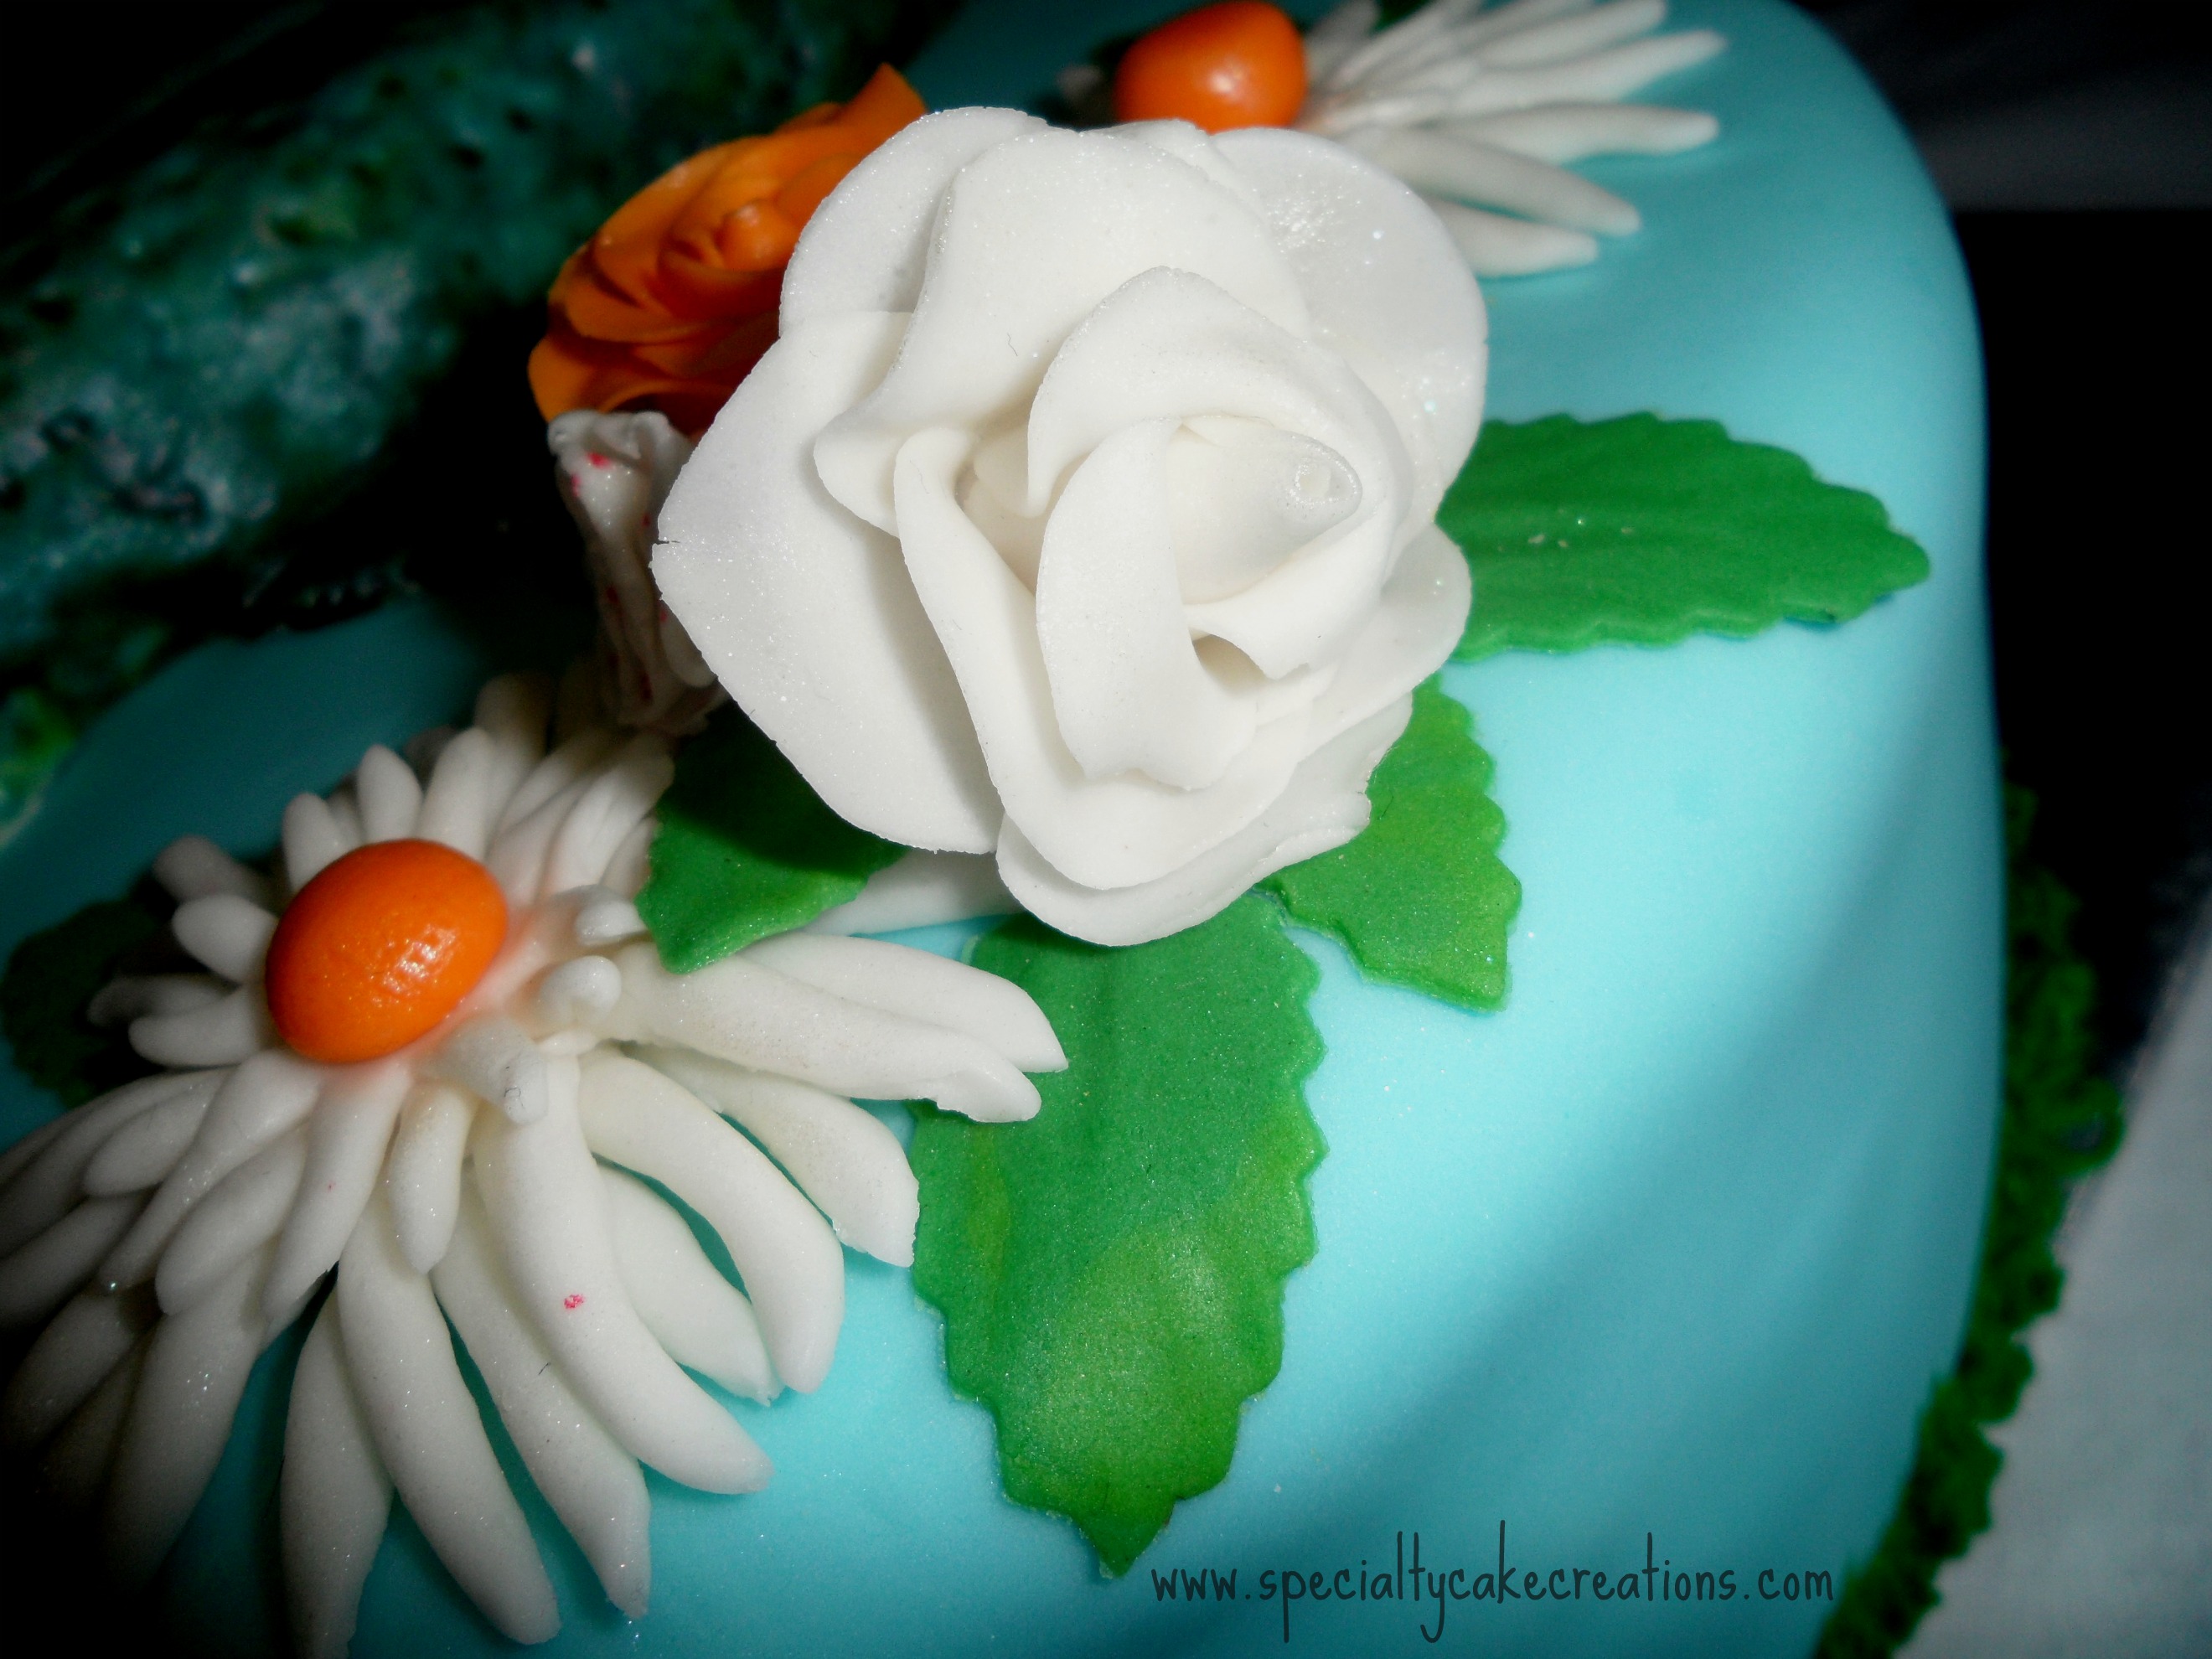 Specialty Fish and Flowers Cake 2